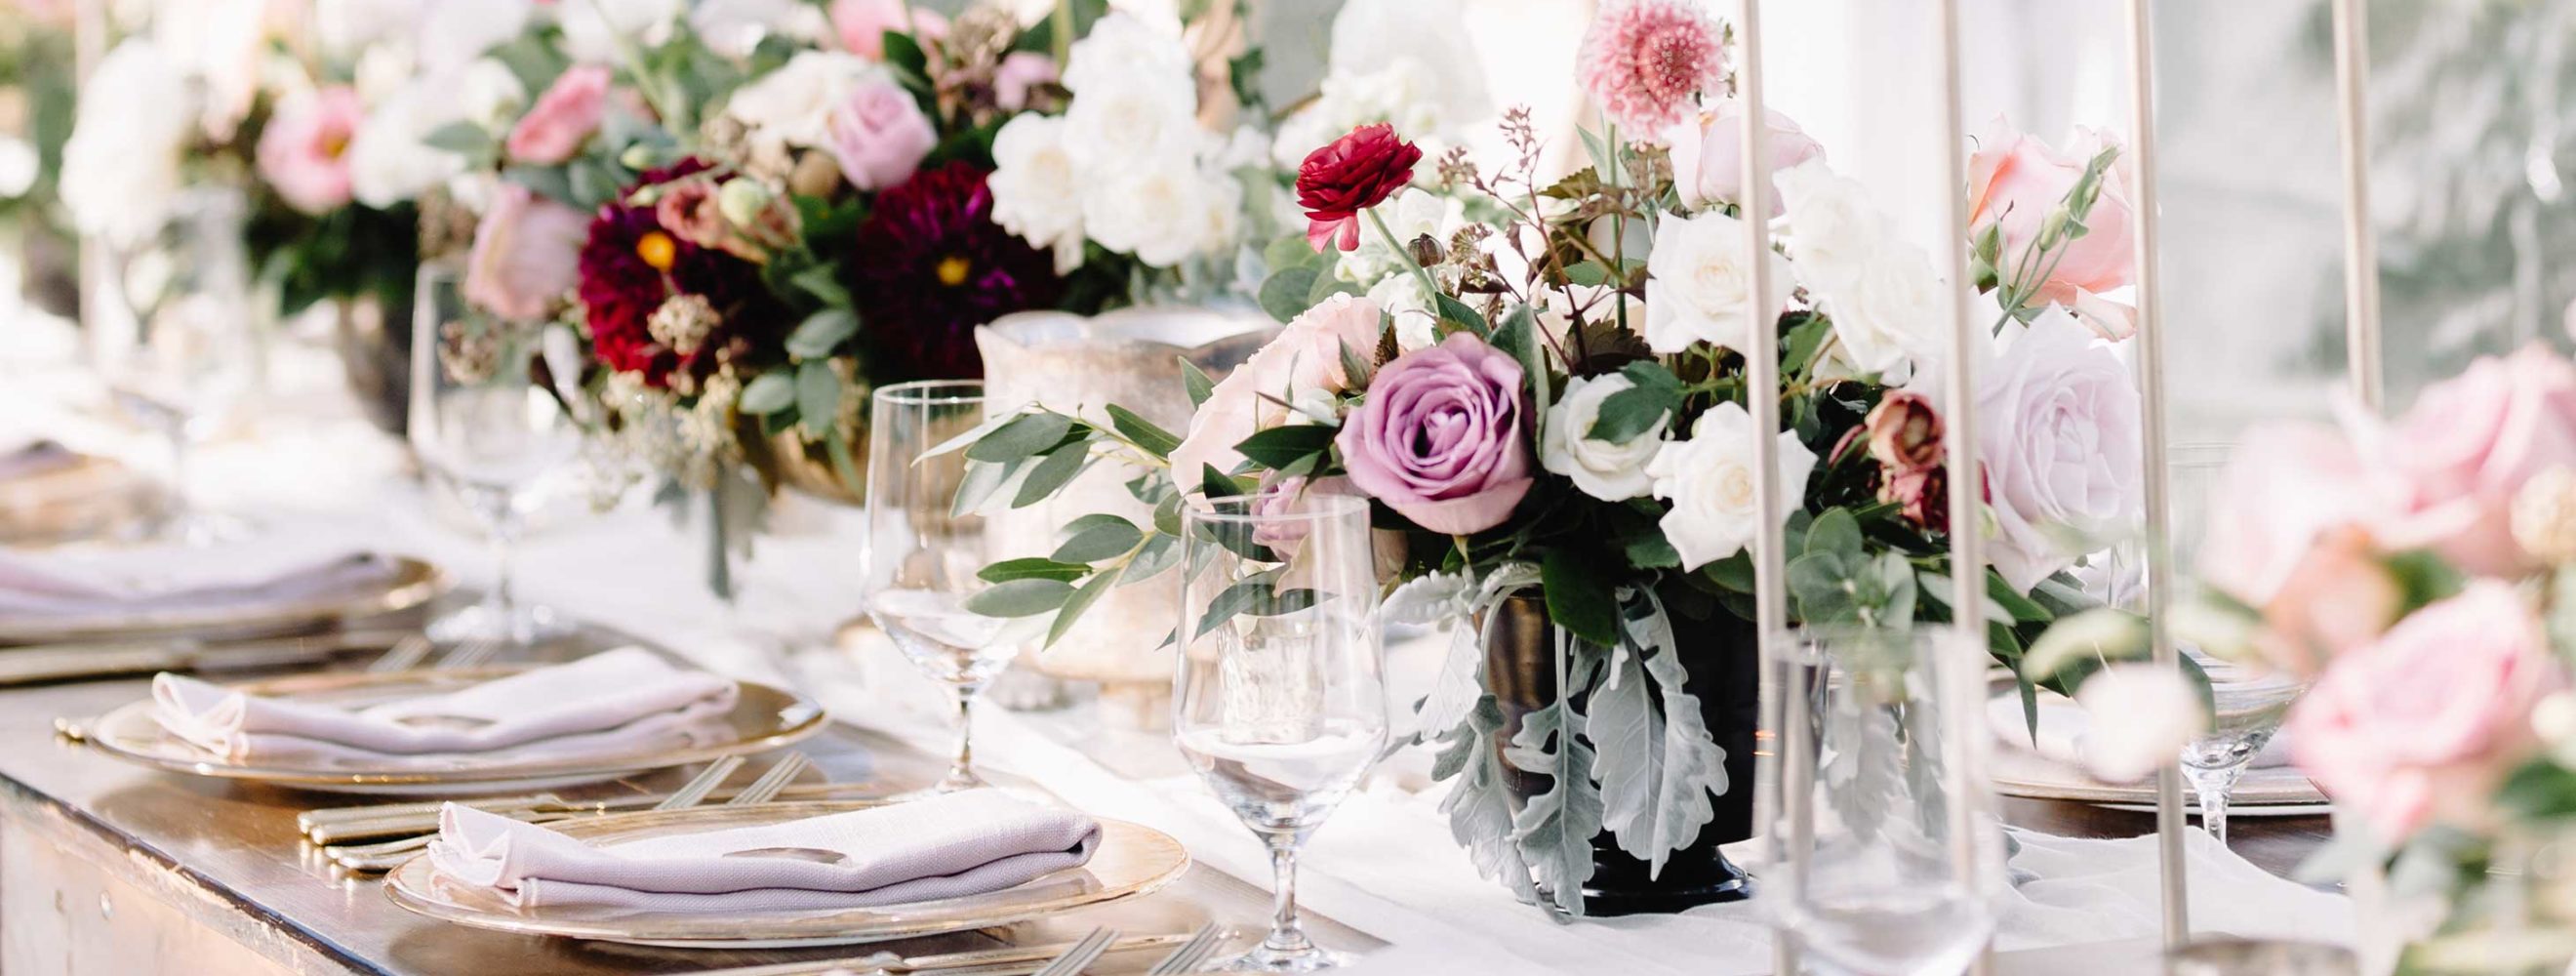 Beautiful pink and burgundy flowers and table settings